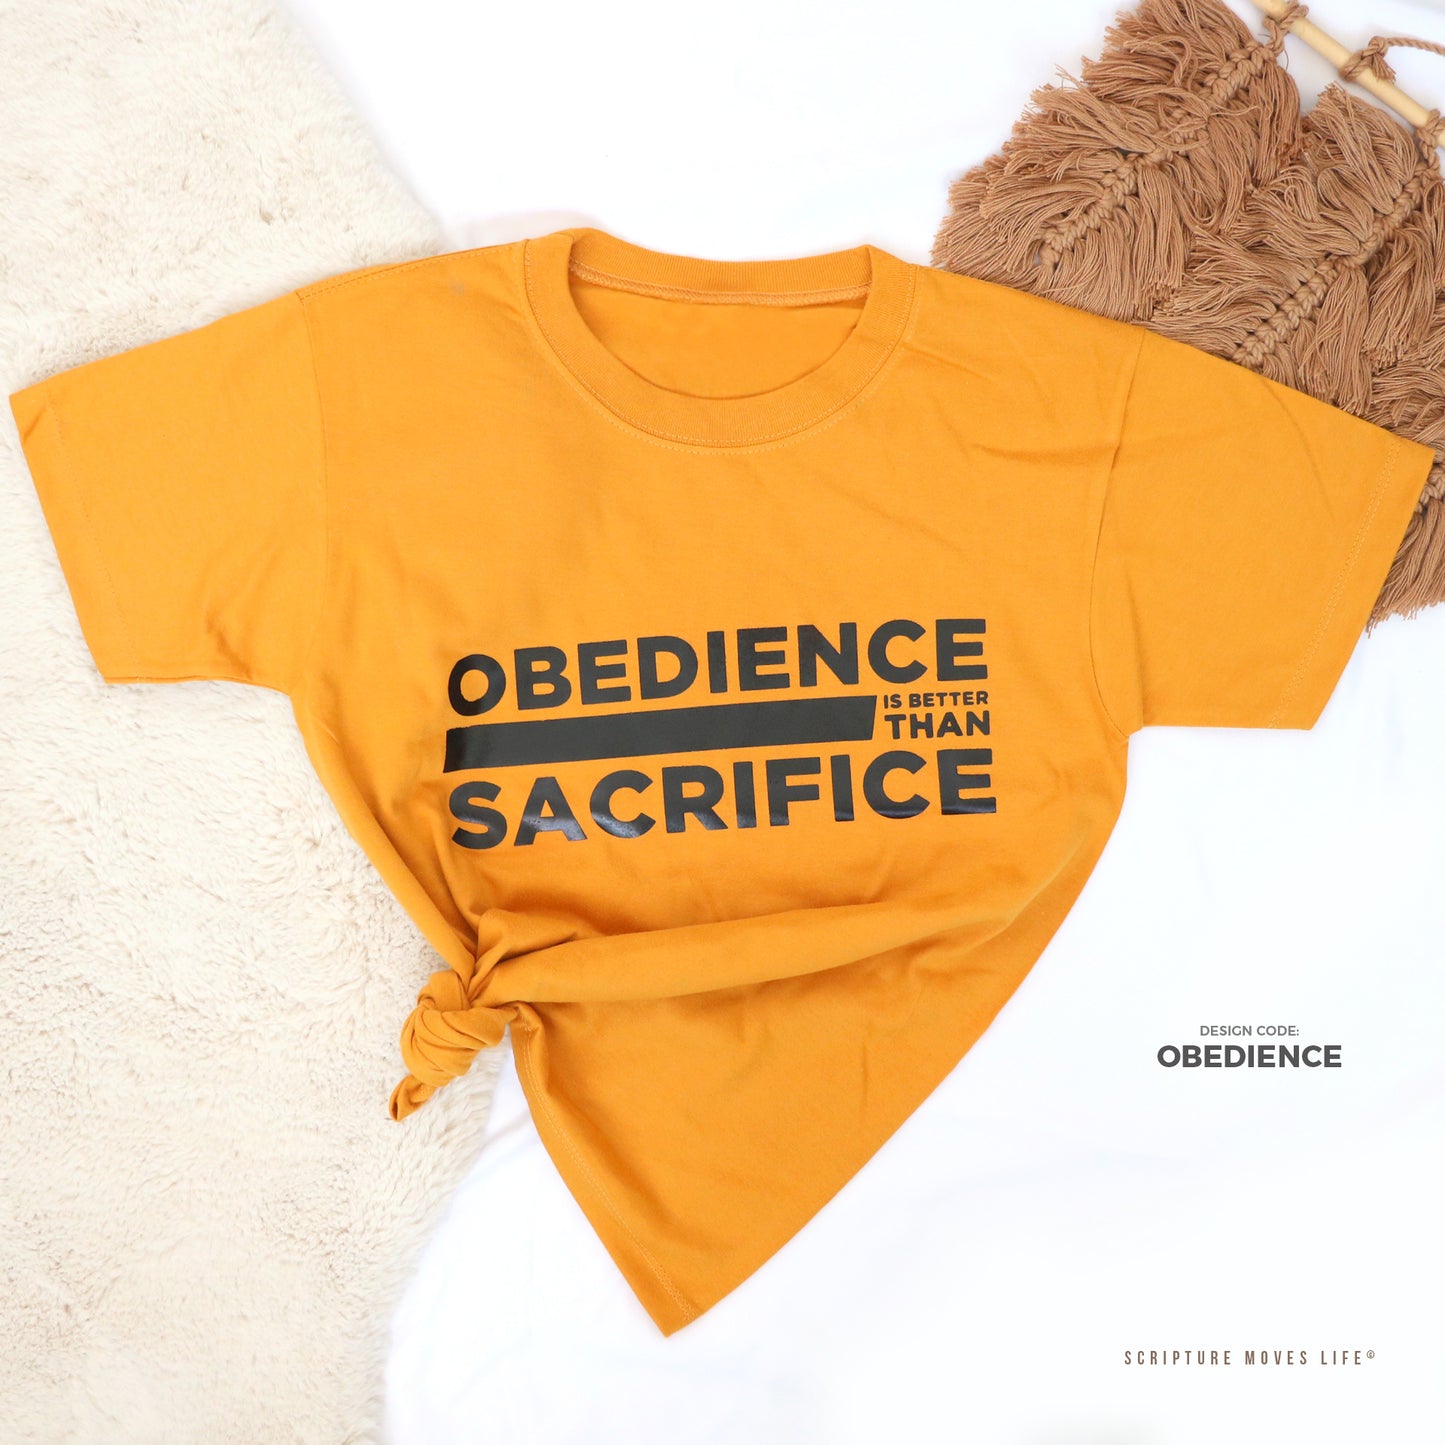 Classic-Obedience is better than sacrifice